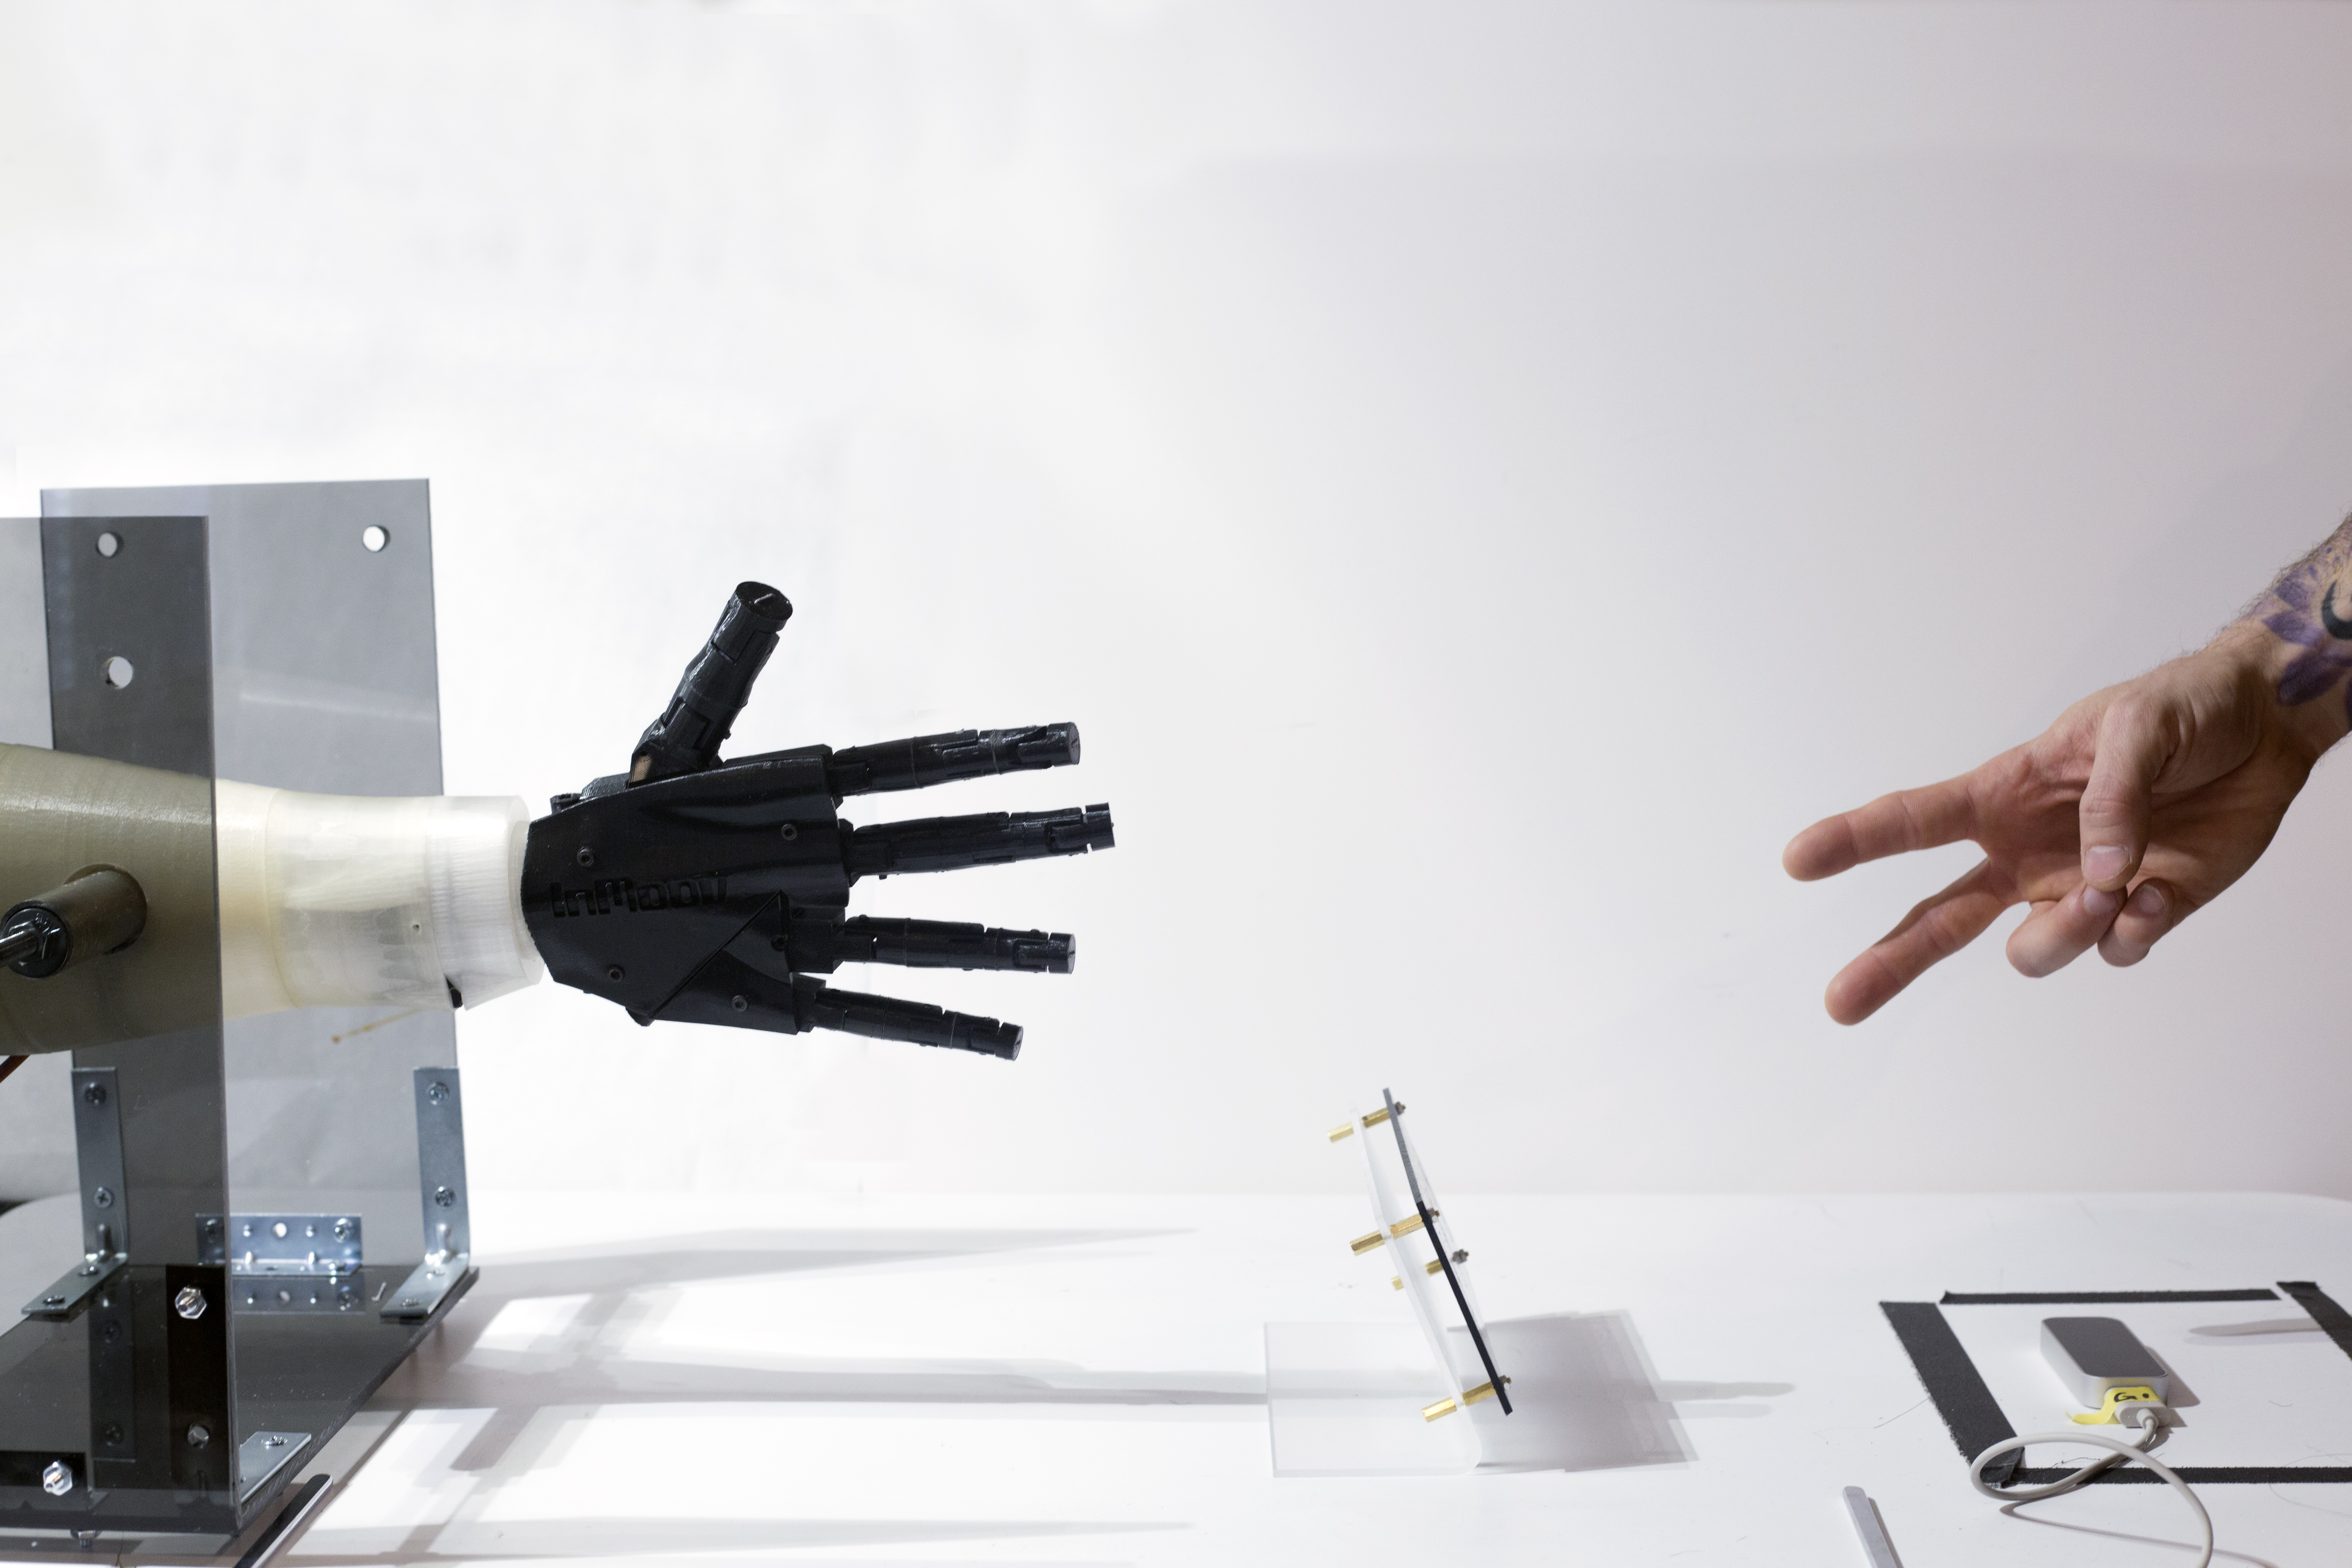 "The Hand" is an arrogant robot that plays rock, paper, scissors with human beings